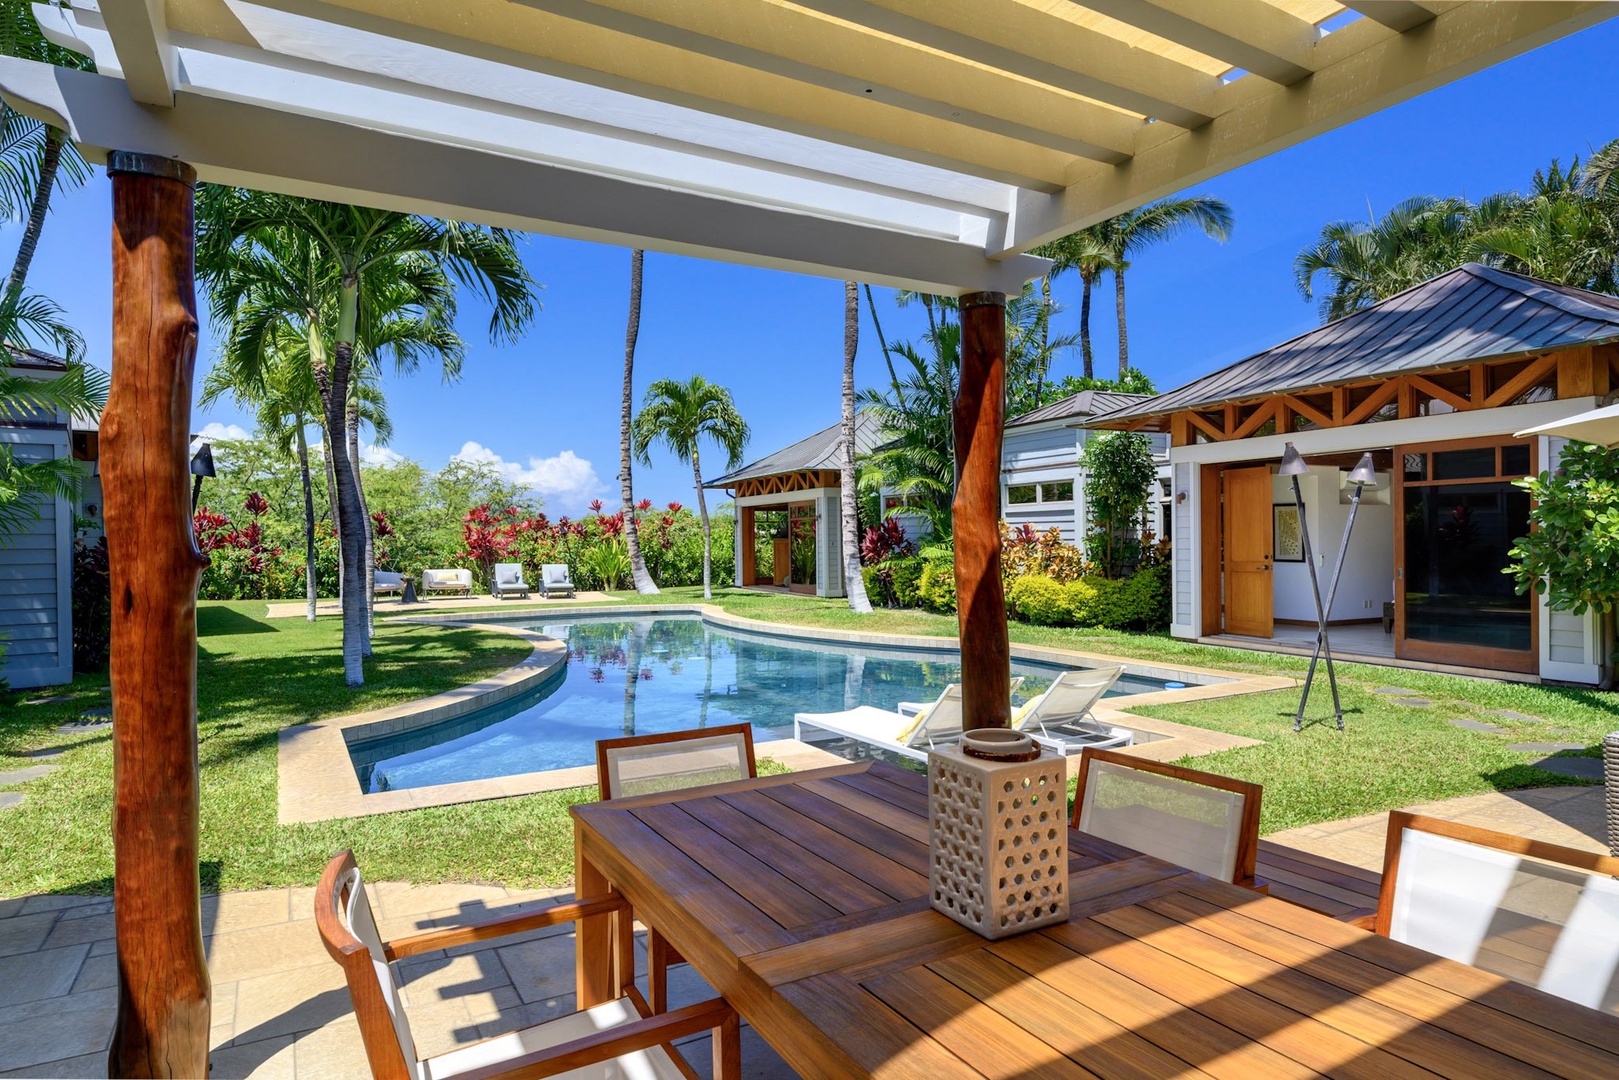 Kamuela Vacation Rentals, 3BD Na Hale 3 at Pauoa Beach Club at Mauna Lani Resort - An al-fresco dining option under the garden pergola where you can enjoy delightful meals during family time.